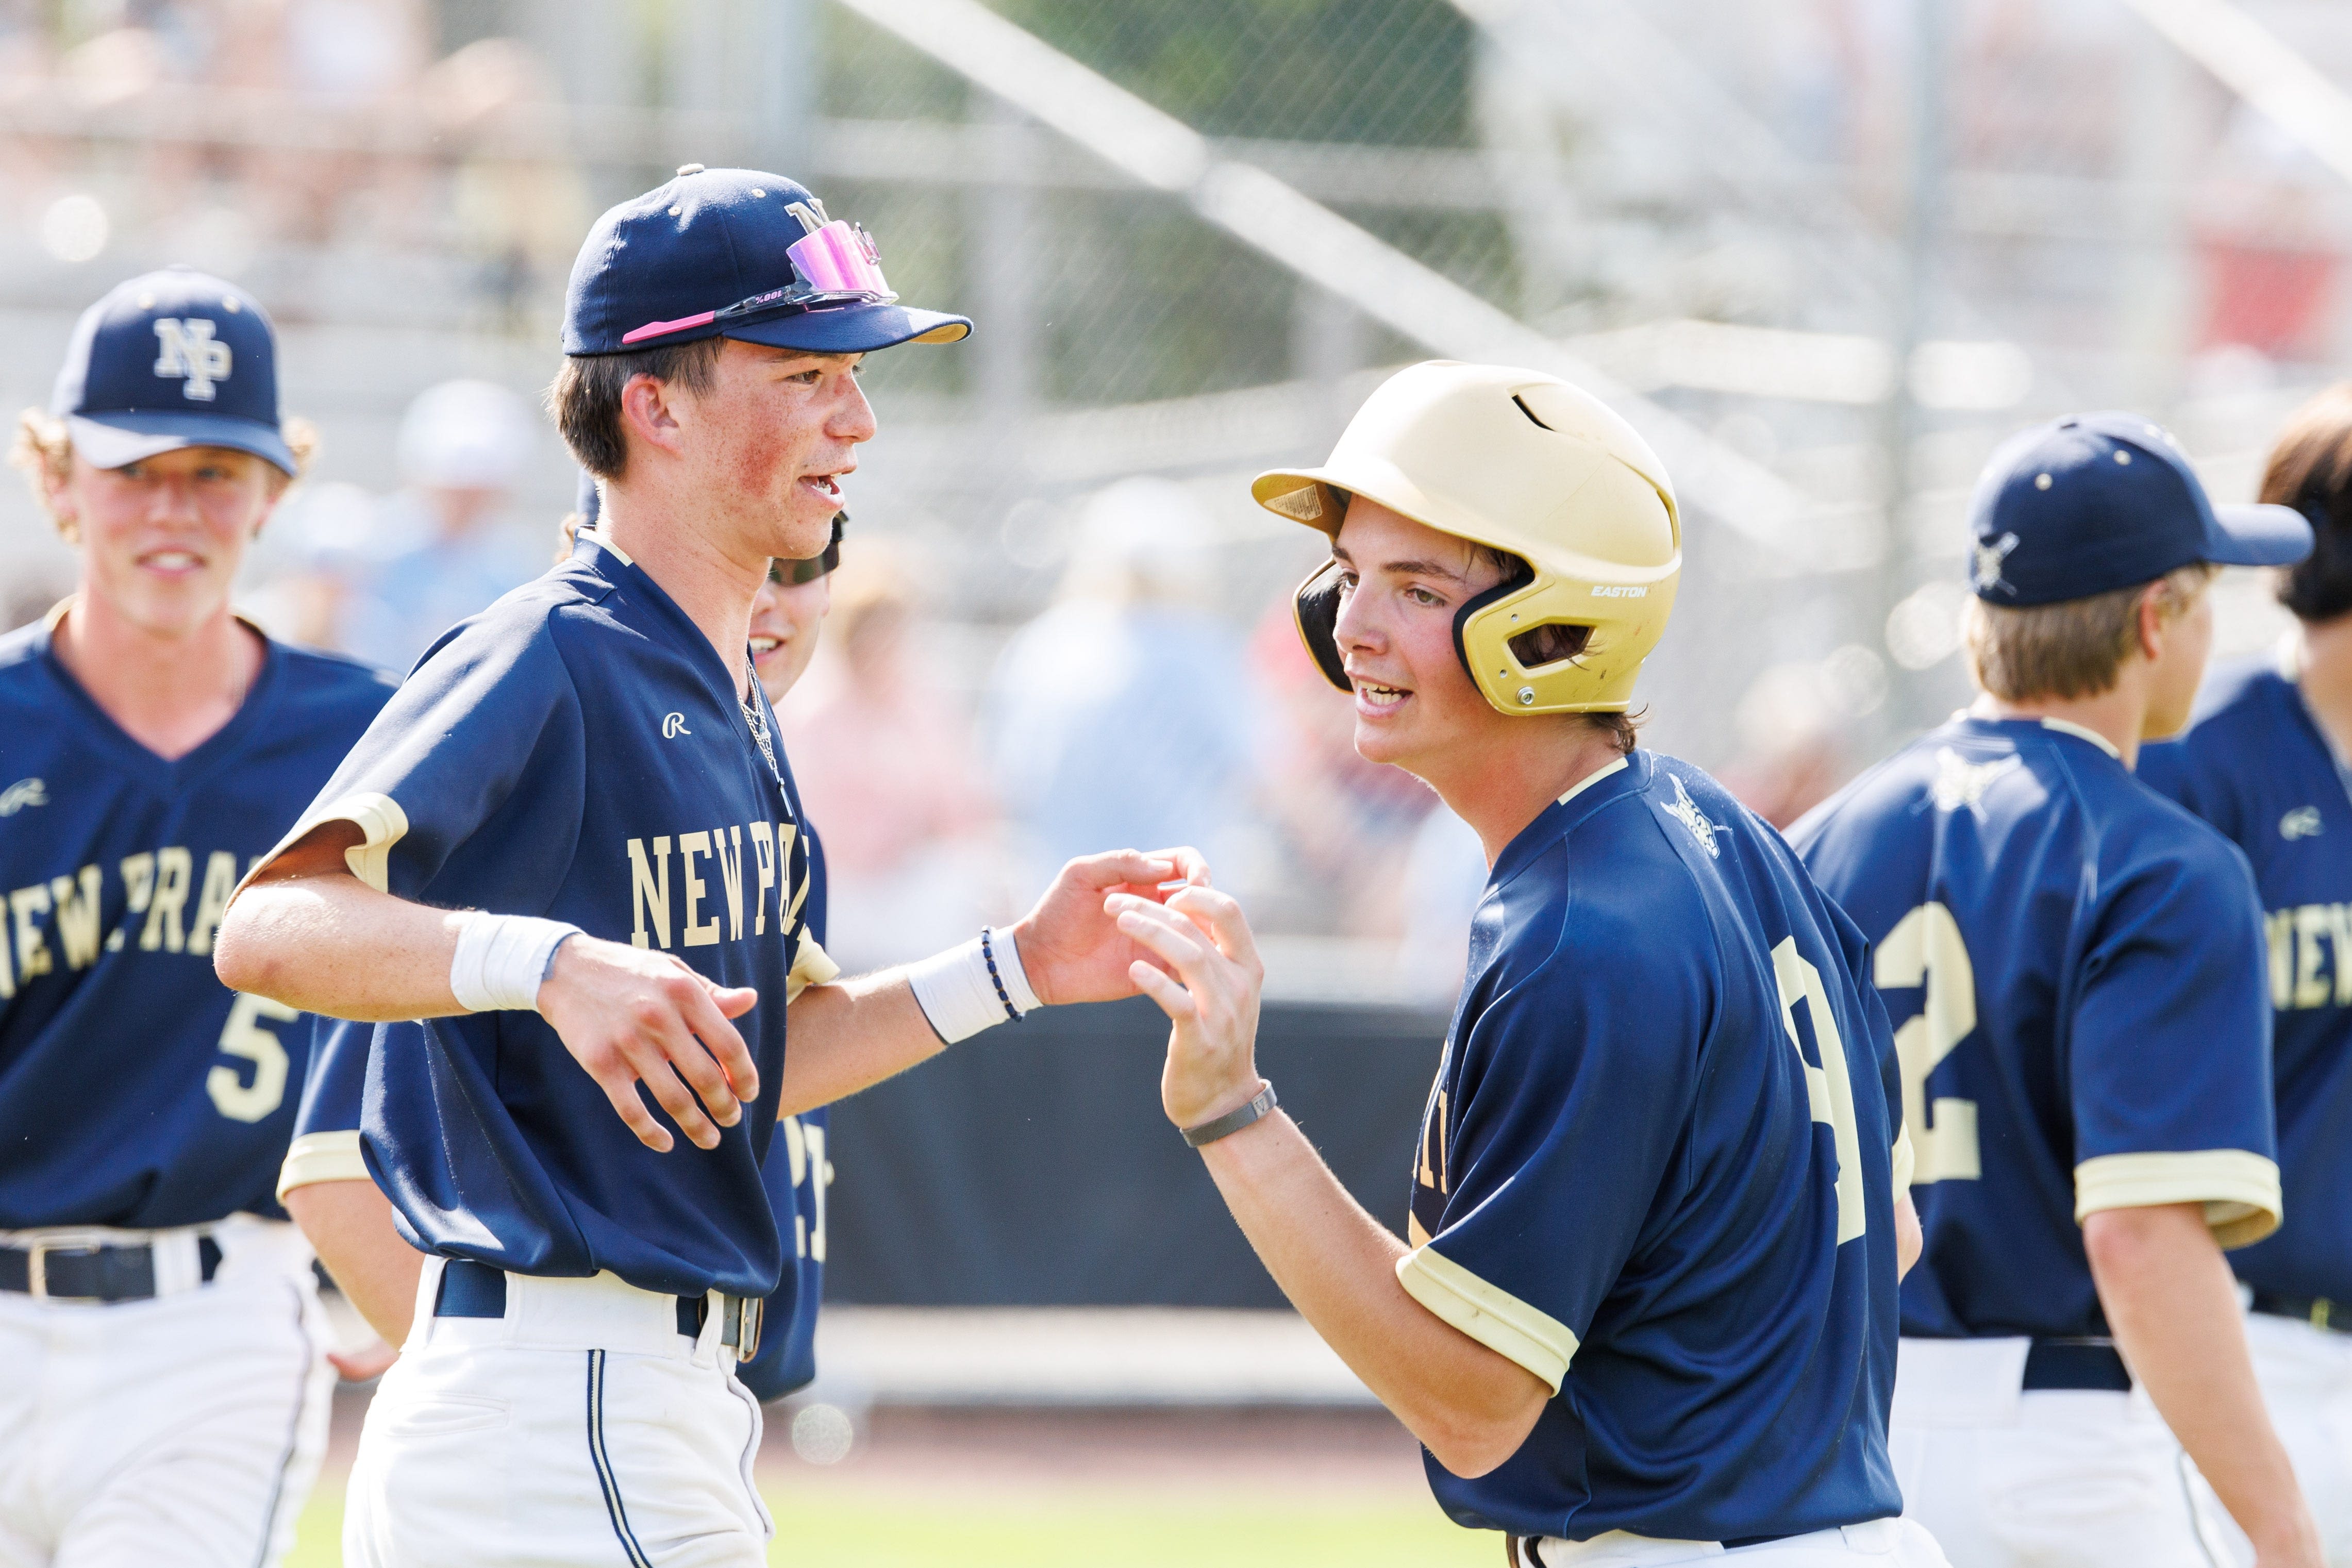 How New Prairie held on at Indiana high school 3A baseball regional at LaPorte